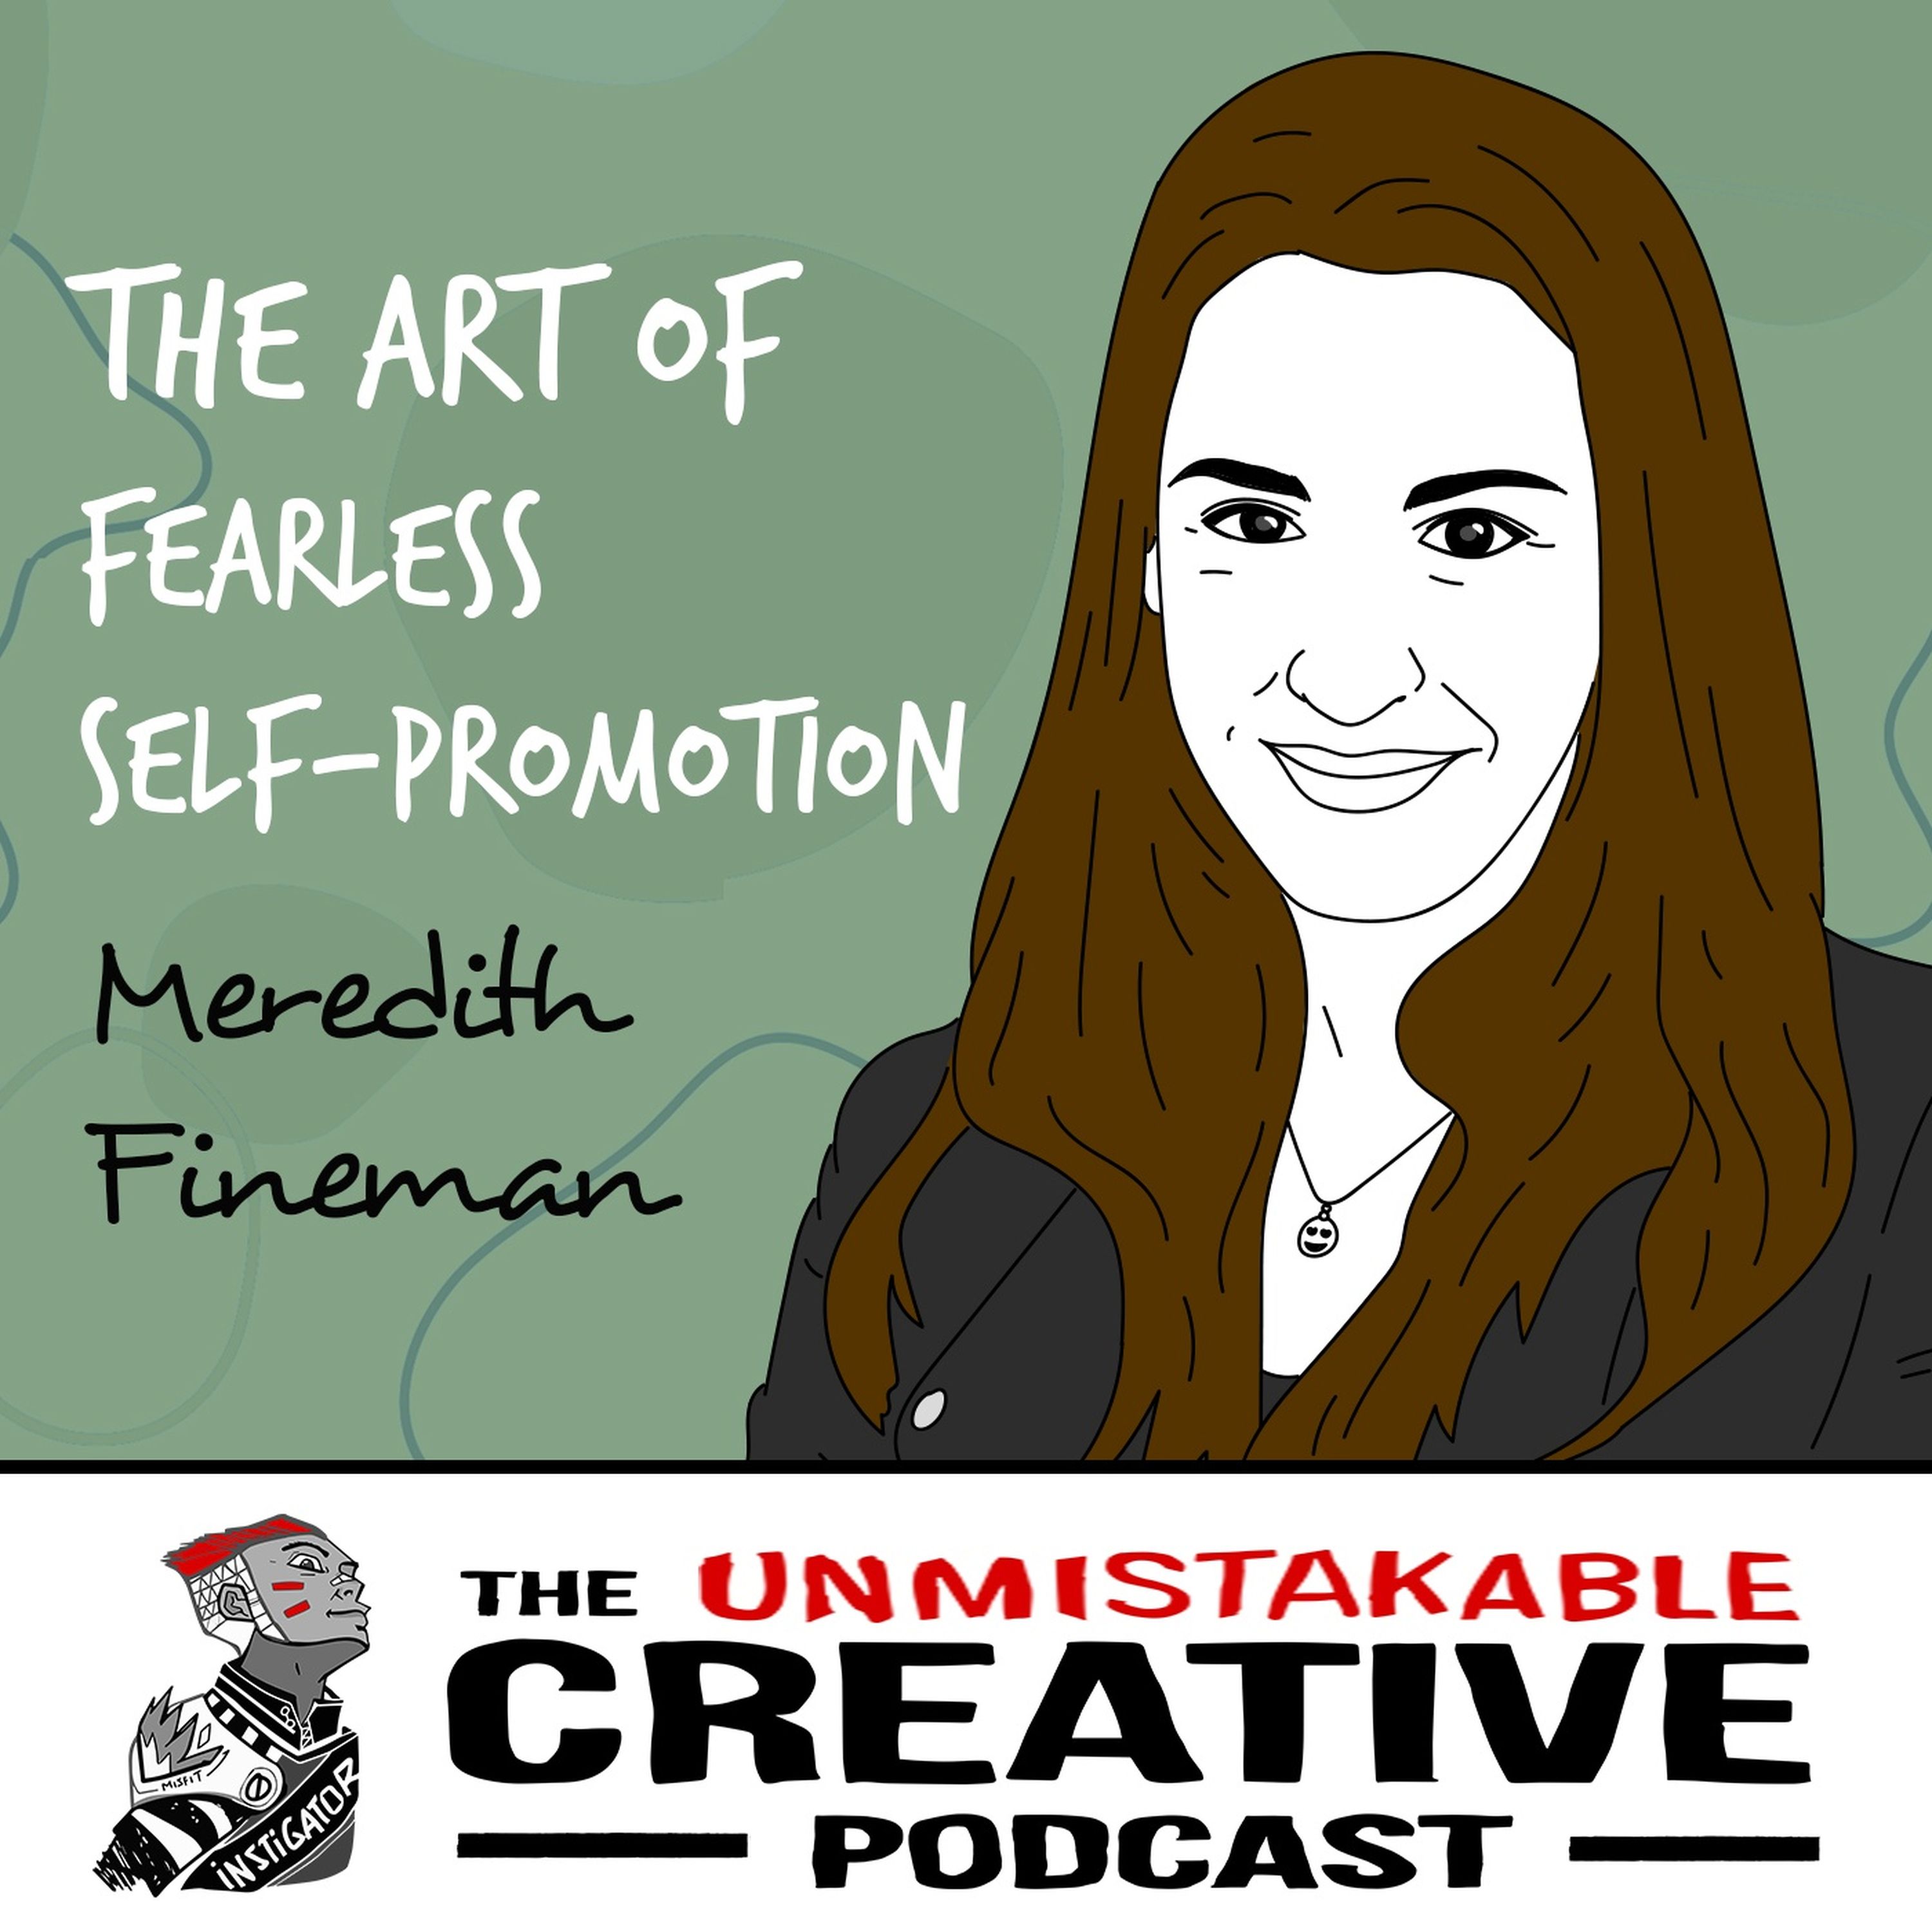 Meredith Fineman | The Art of Fearless Self-Promotion